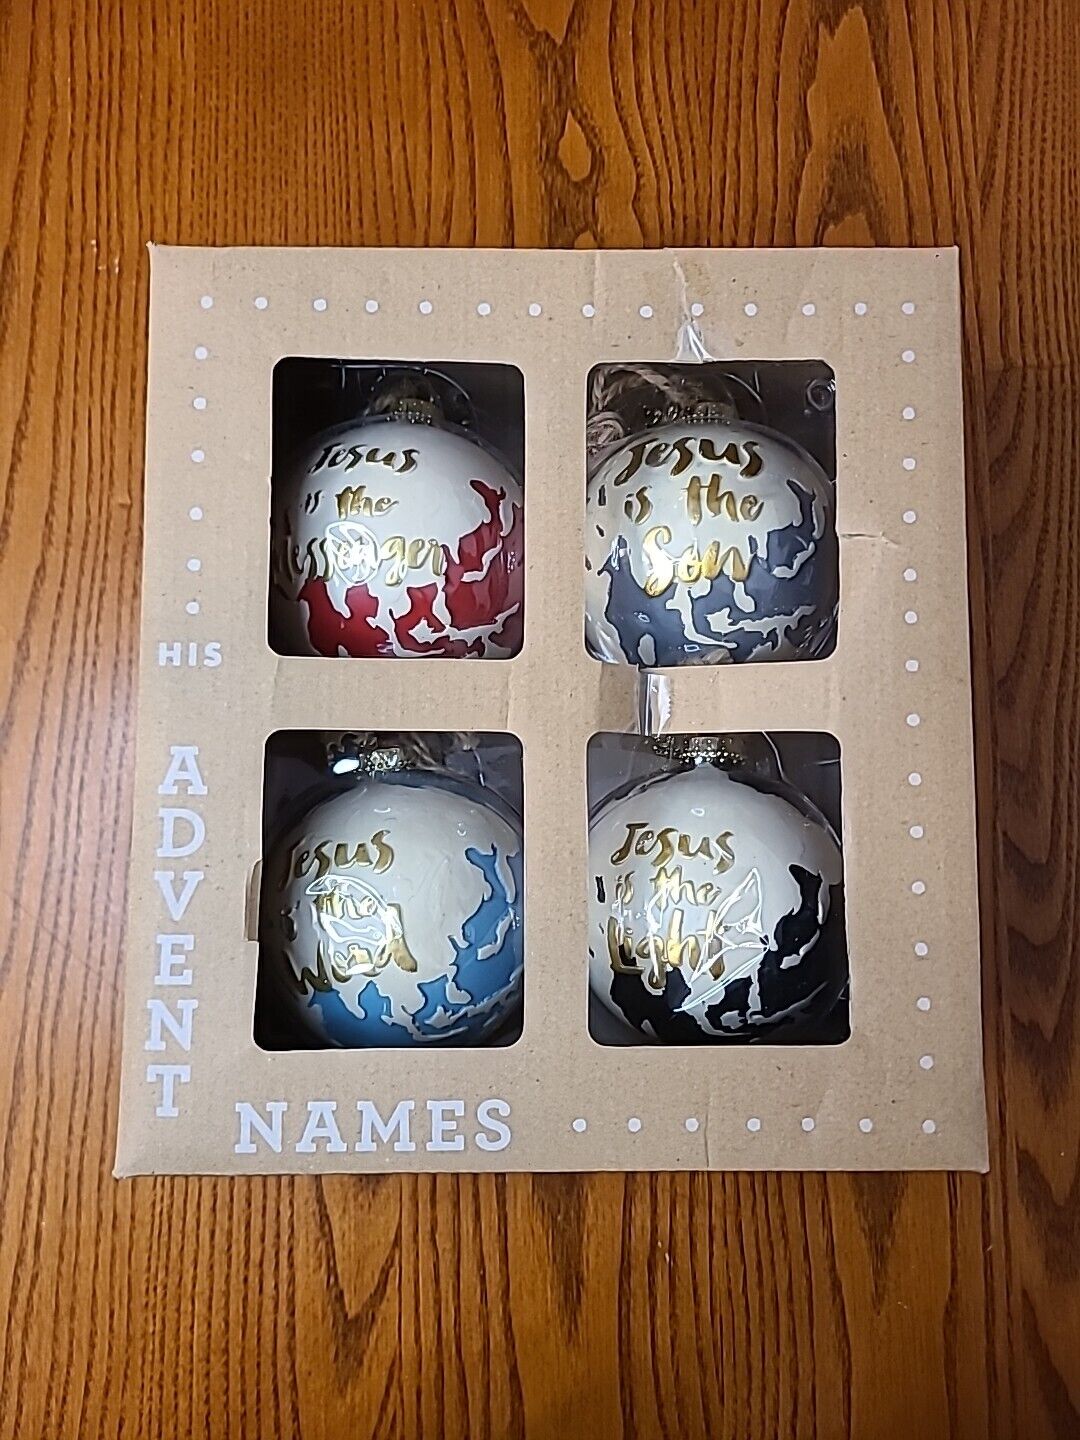 Ever Thine Home HIS ADVENT NAMES 2016 Christmas Ornaments Christian